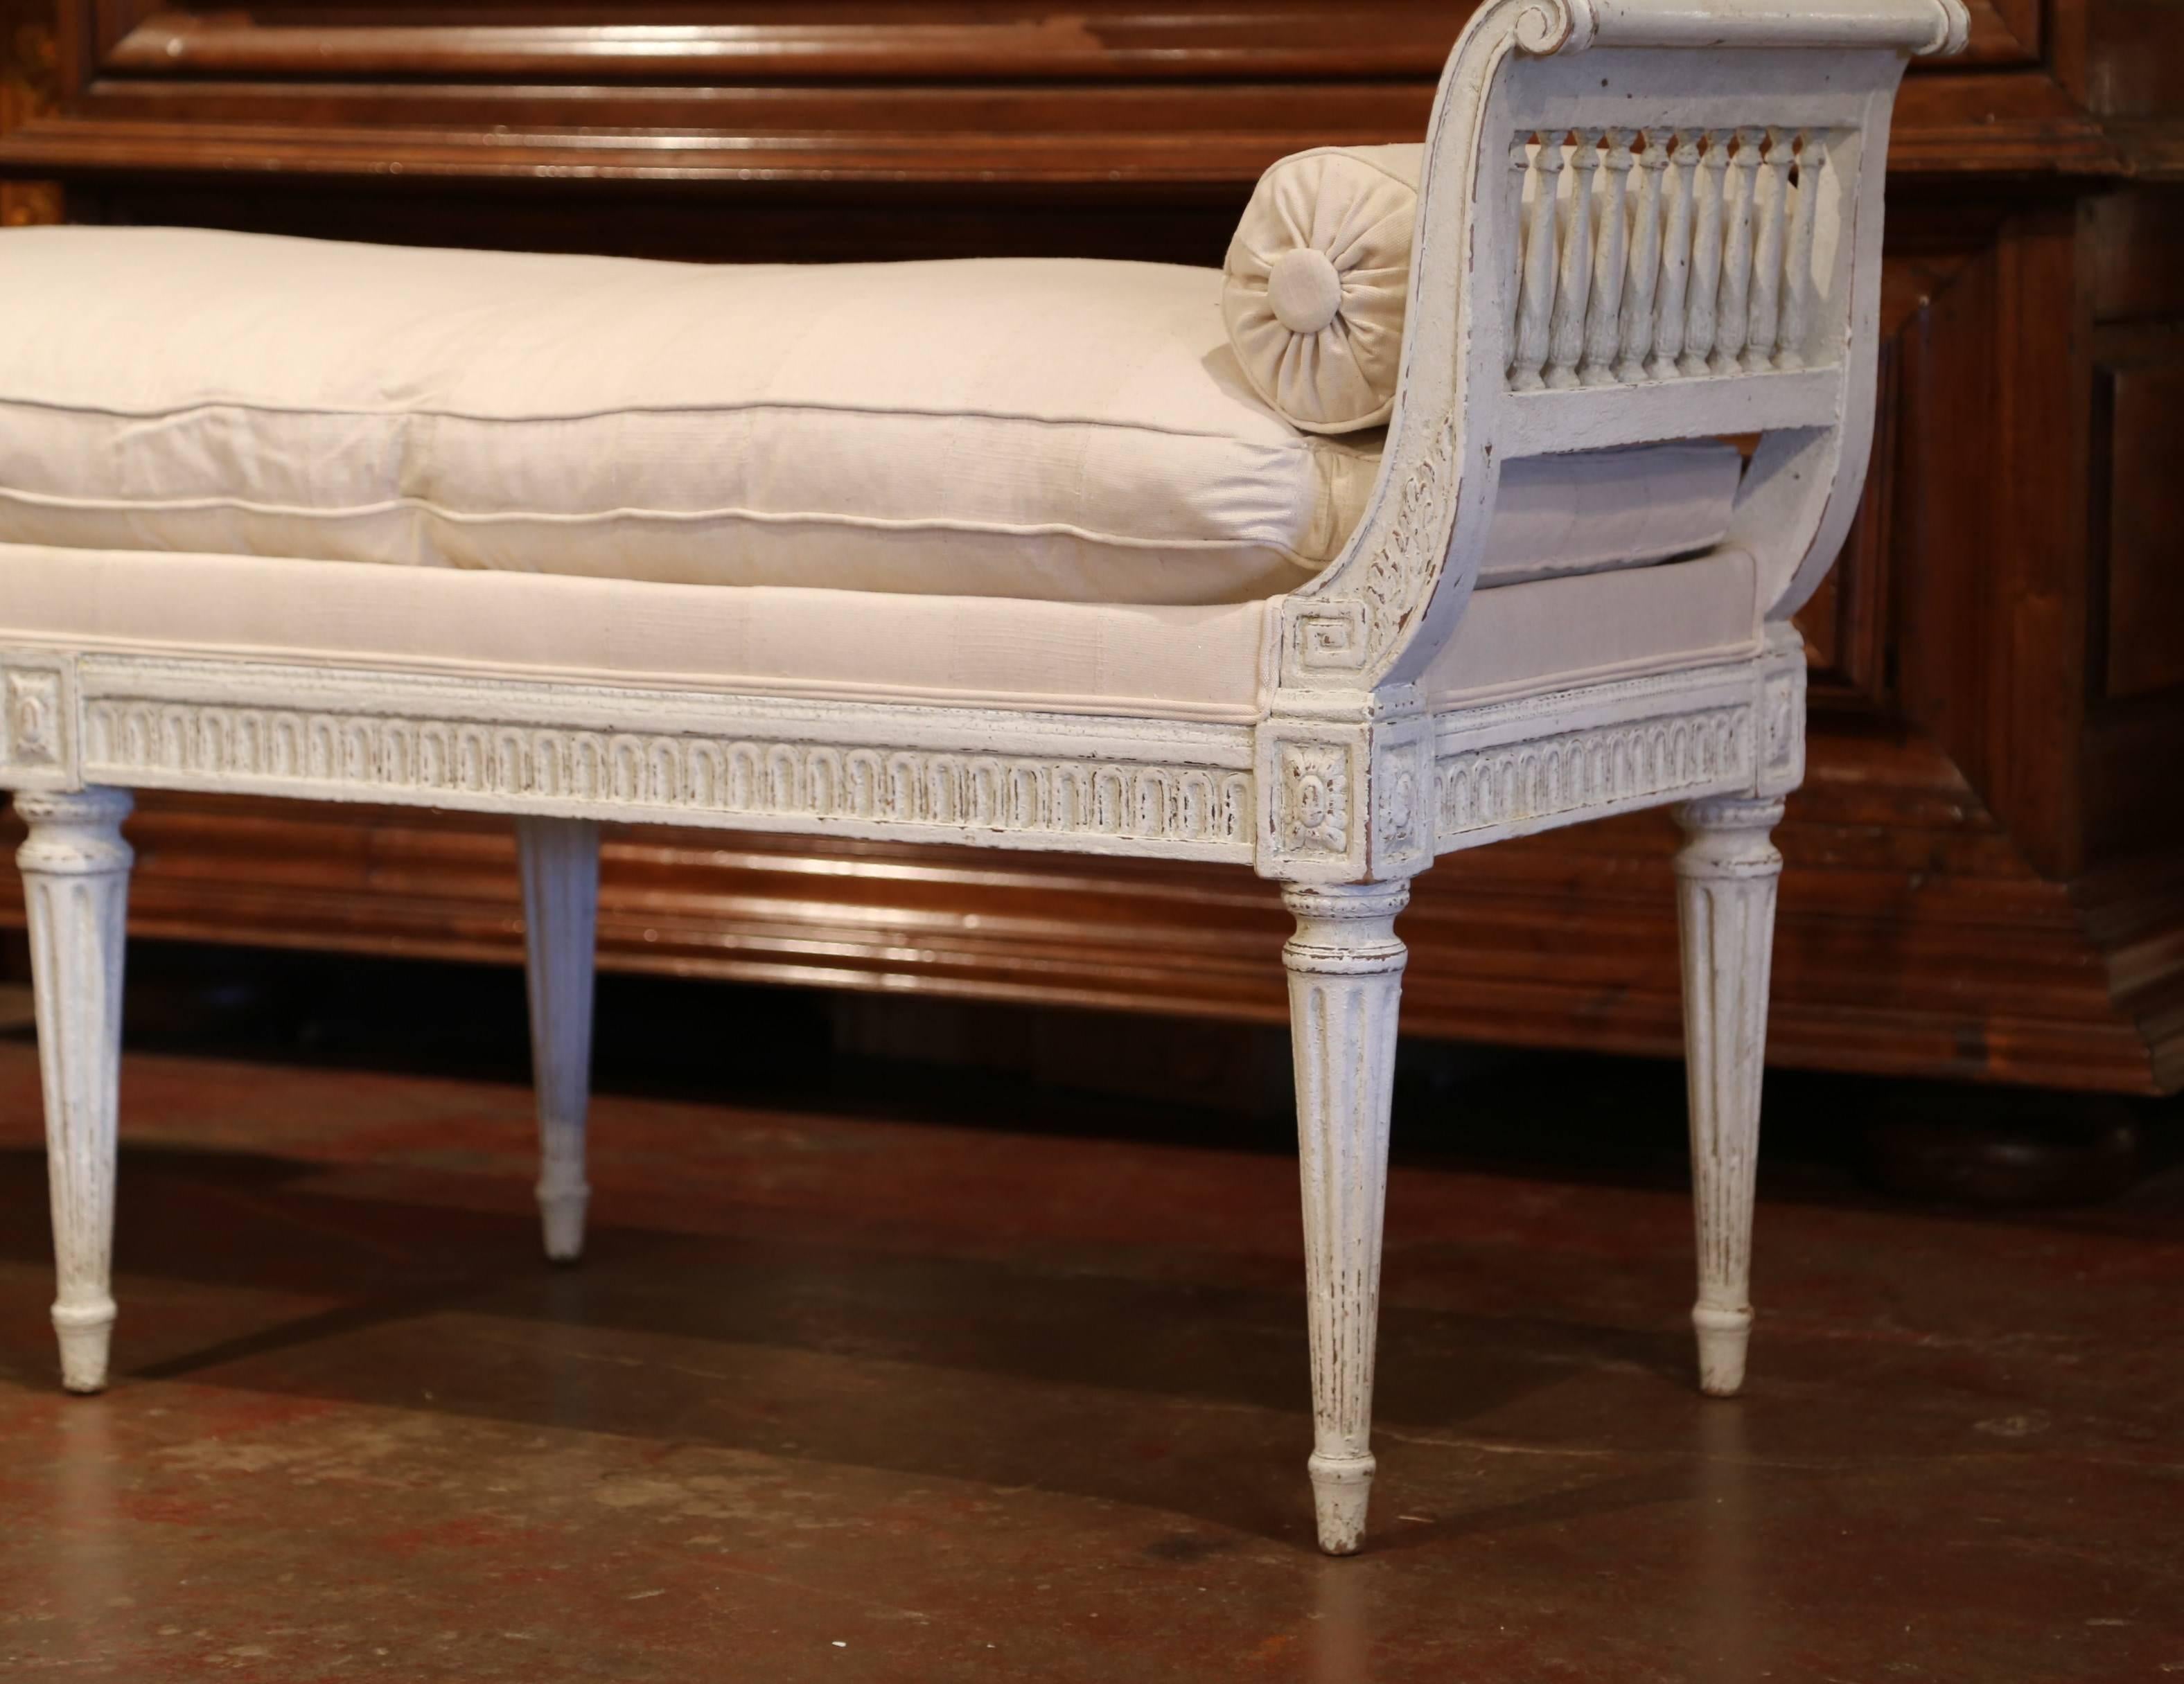 Hand-Painted 19th Century French Louis XVI Carved Painted Banquette with Back & Beige Fabric